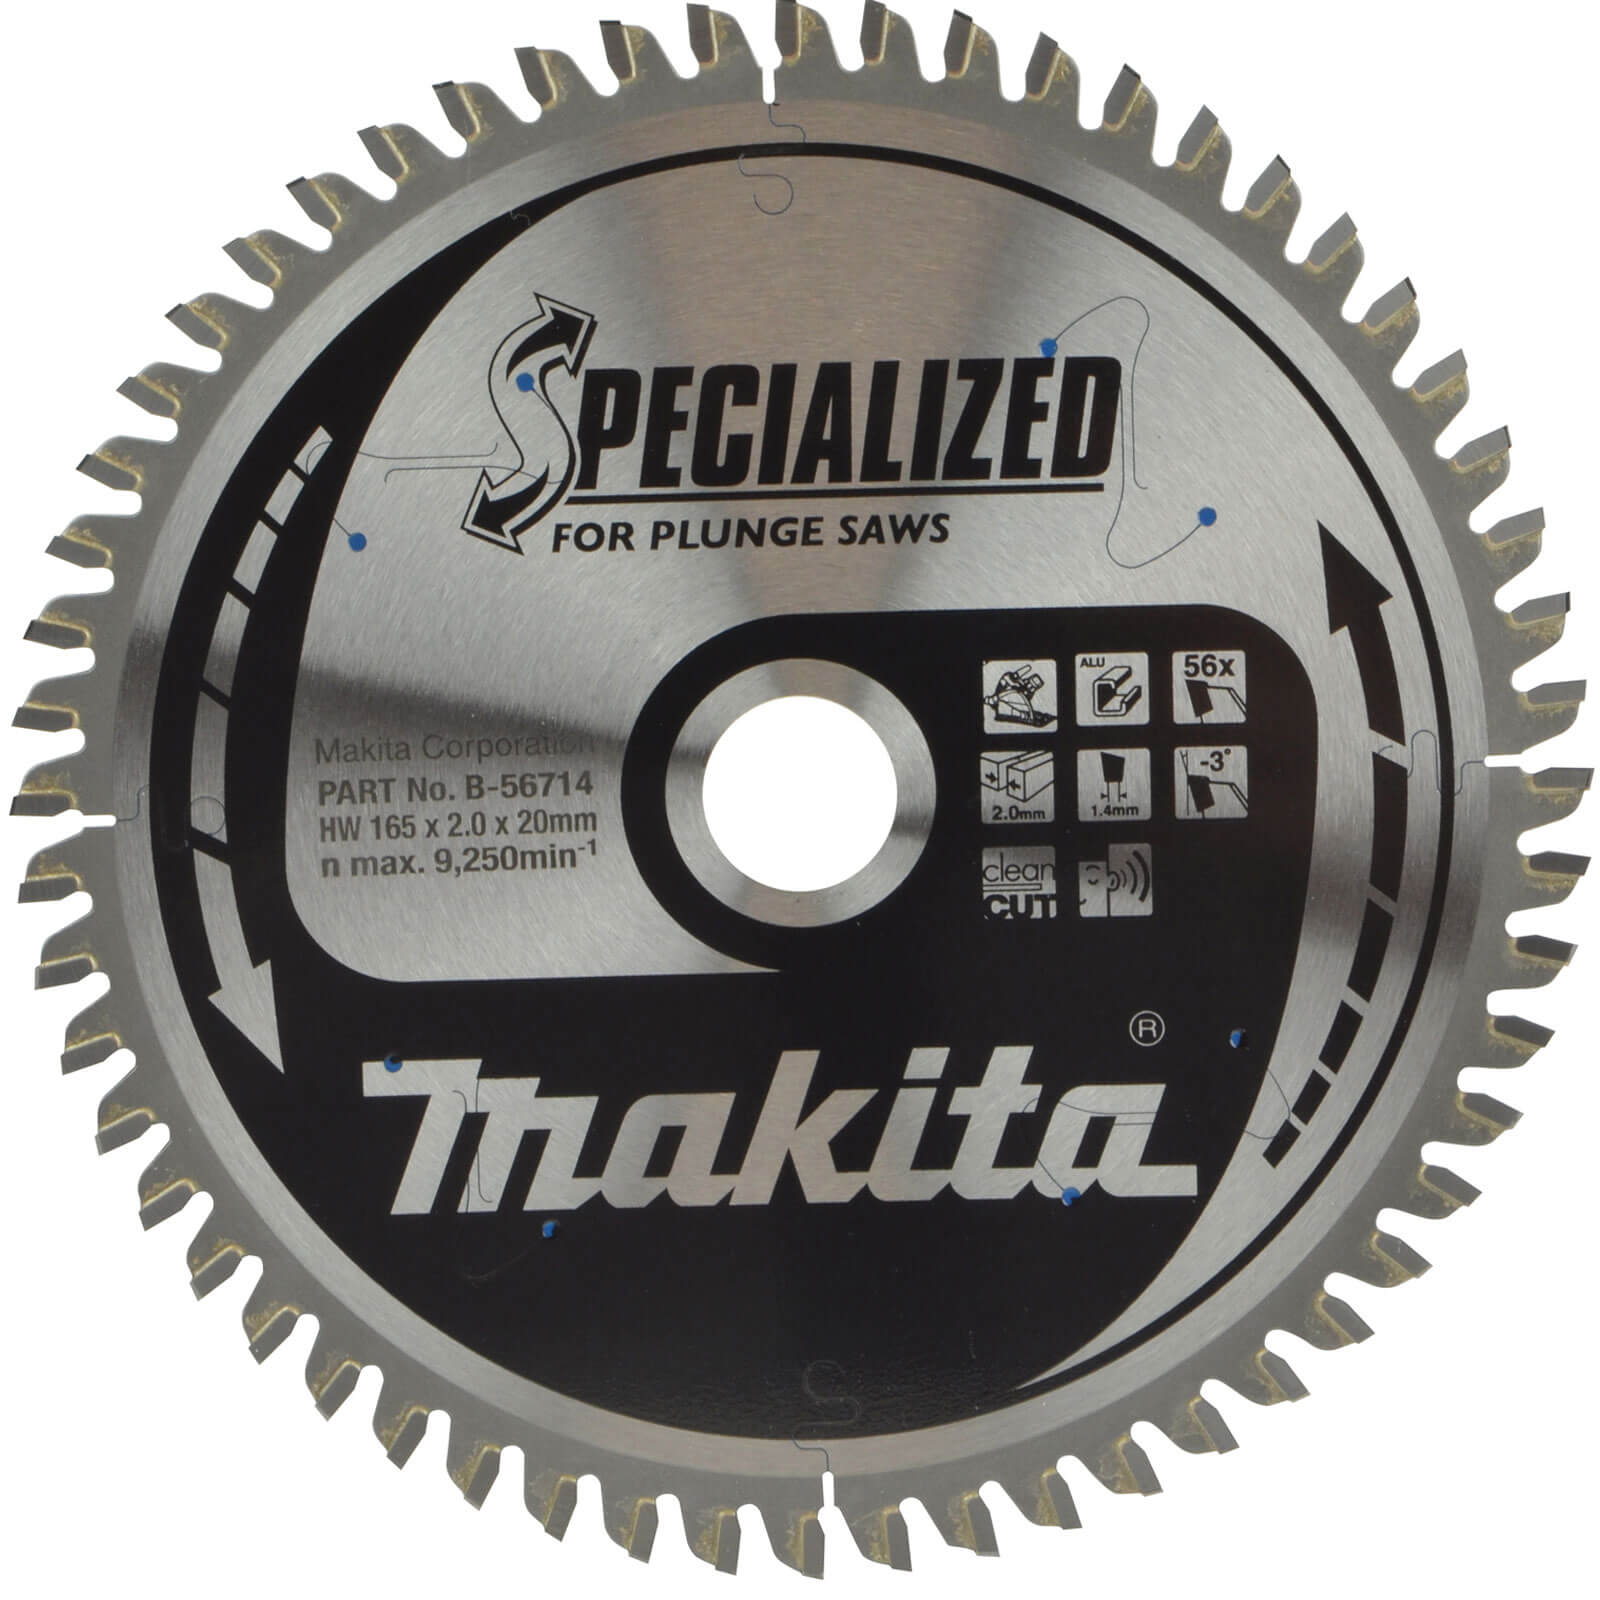 Photo of Makita Specialized Plunge Saw Aluminium Cutting Saw Blade 165mm 56t 20mm